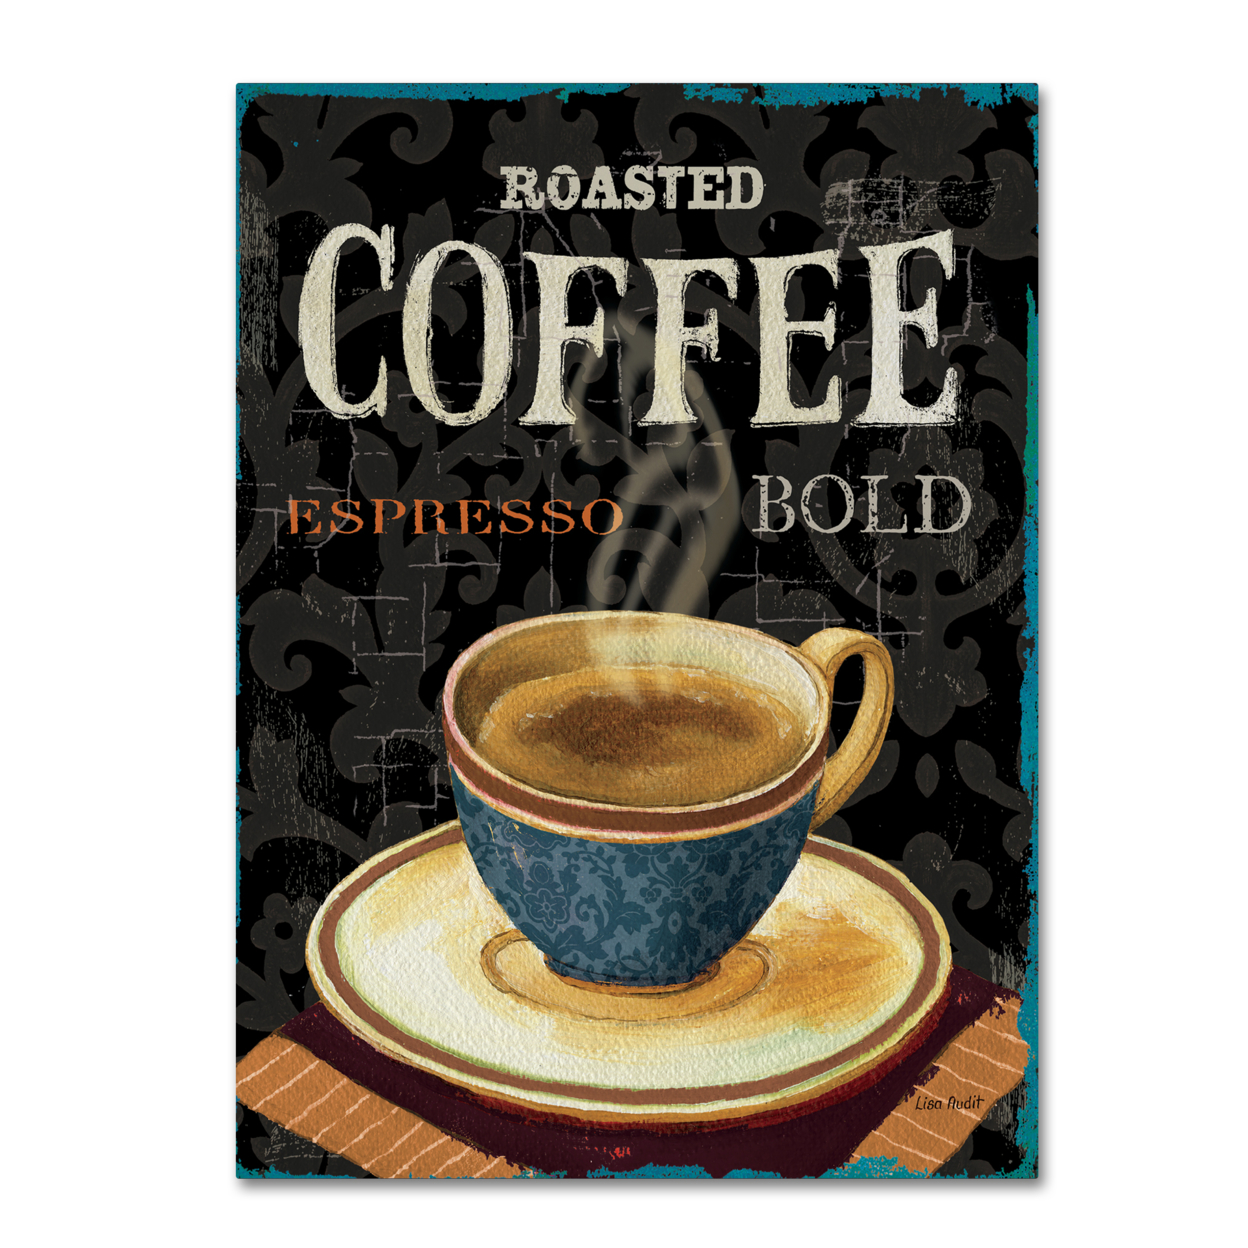 Lisa Audit 'Today's Coffee IV' Canvas Wall Art 35 X 47 Inches